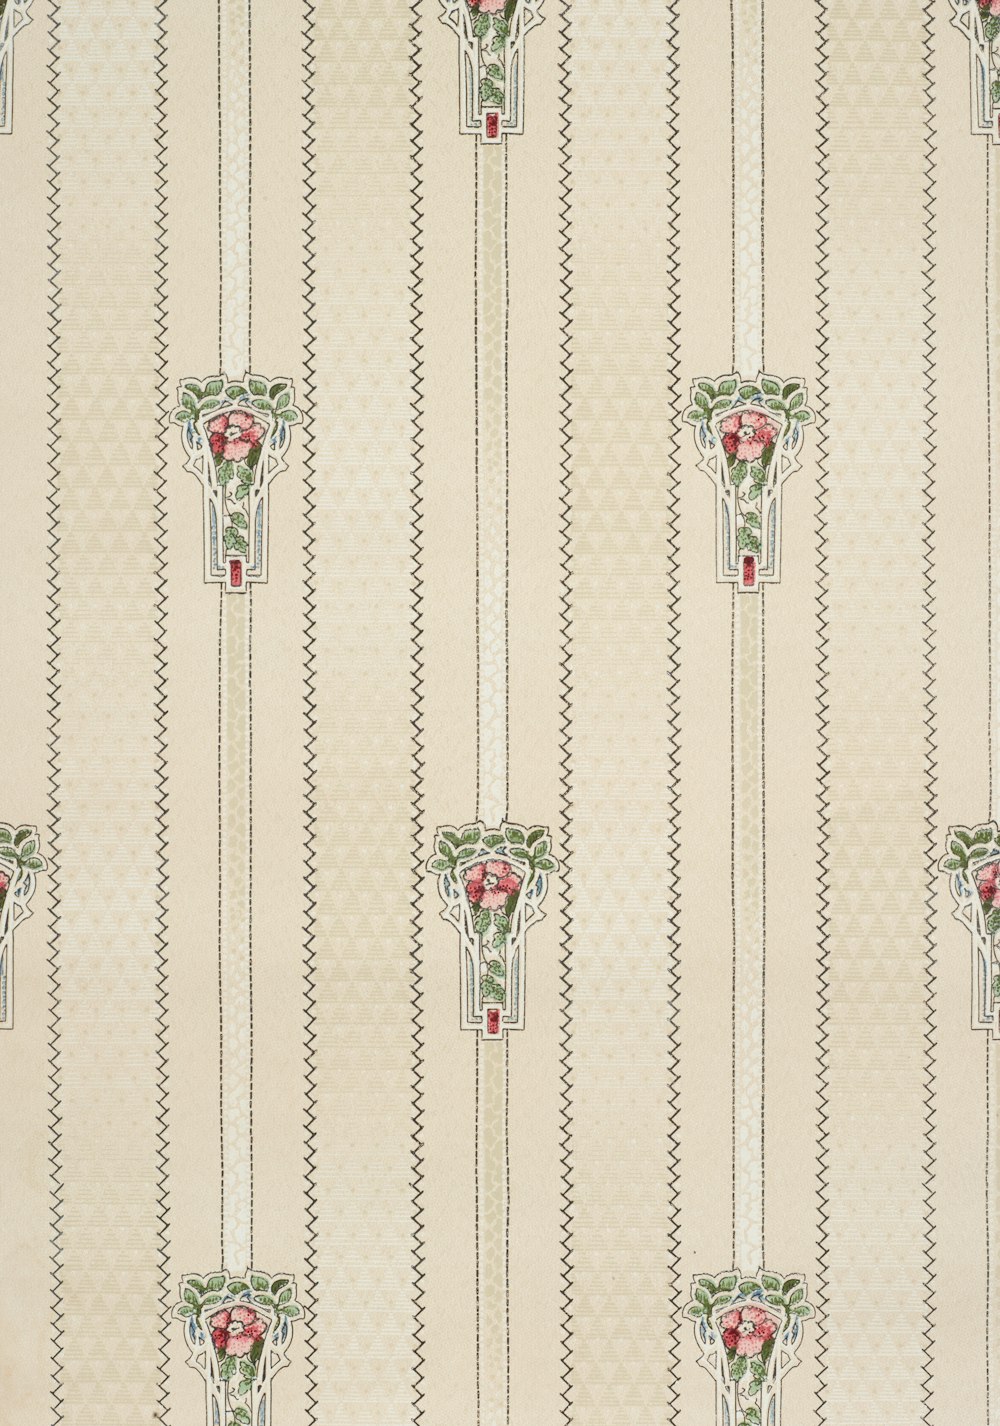 a wallpaper with roses and vines on a beige background